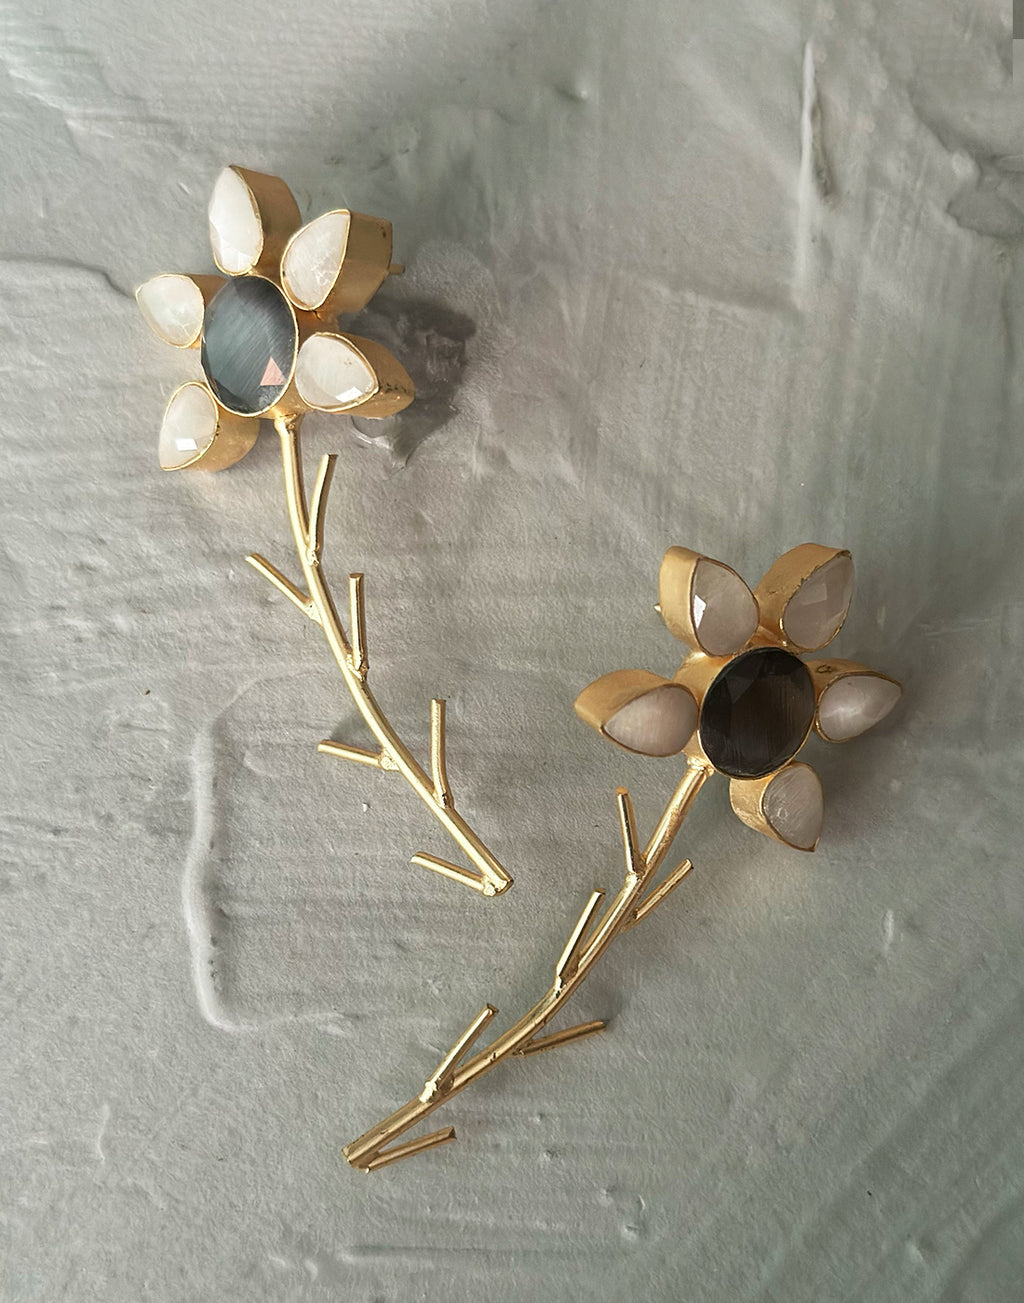 Floral Vine Earrings (Grey) - Statement Earrings - Gold-Plated & Hypoallergenic Jewellery - Made in India - Dubai Jewellery - Dori